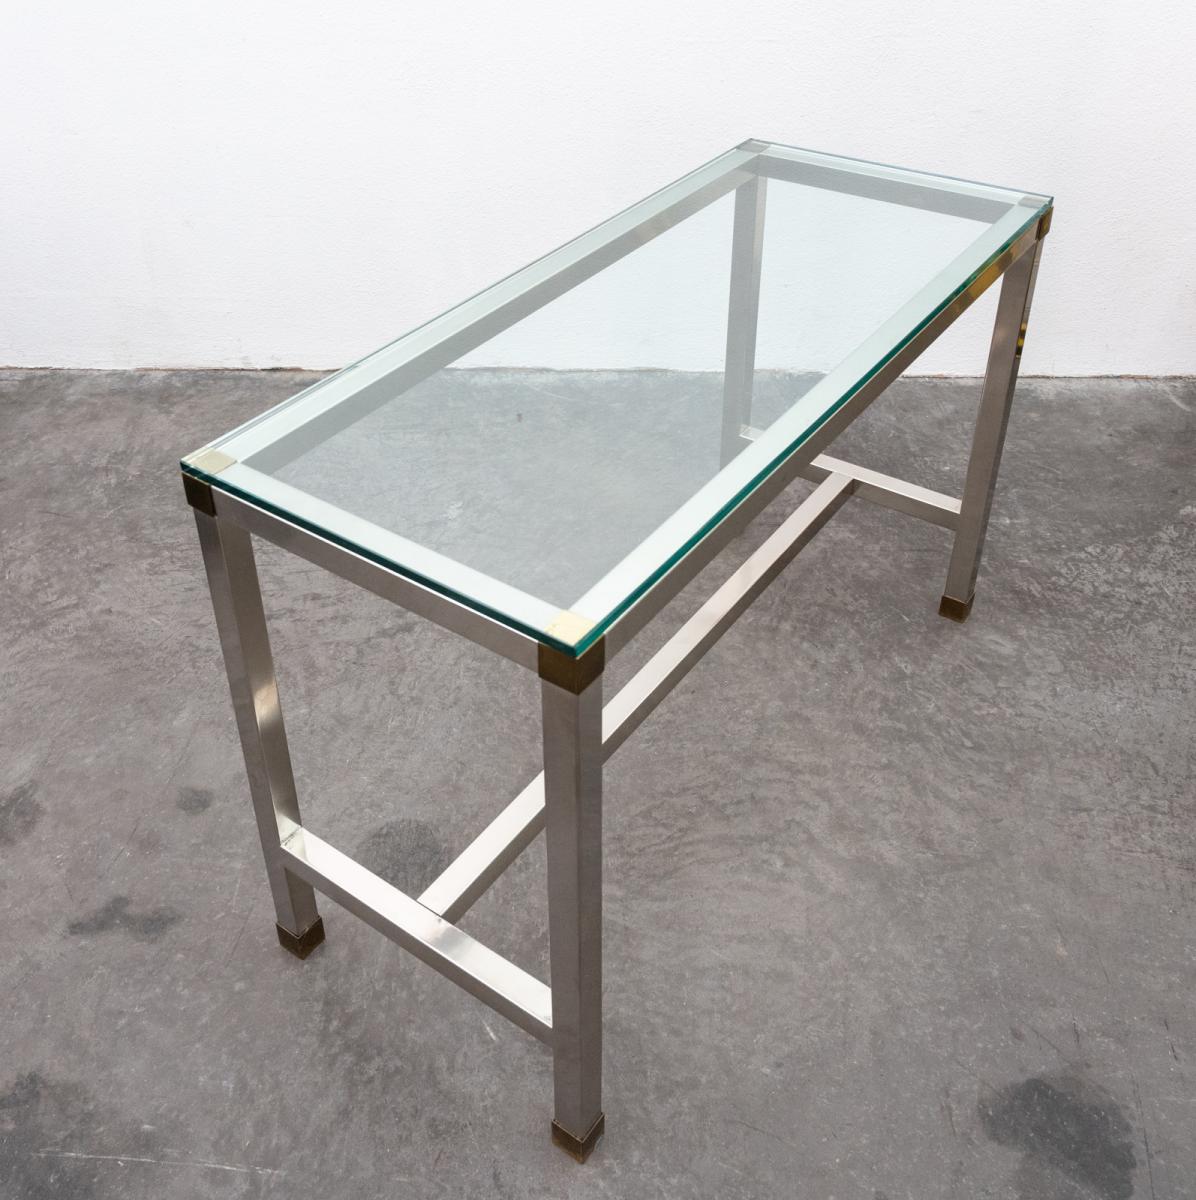 Stainless Steel Console By David Hicks